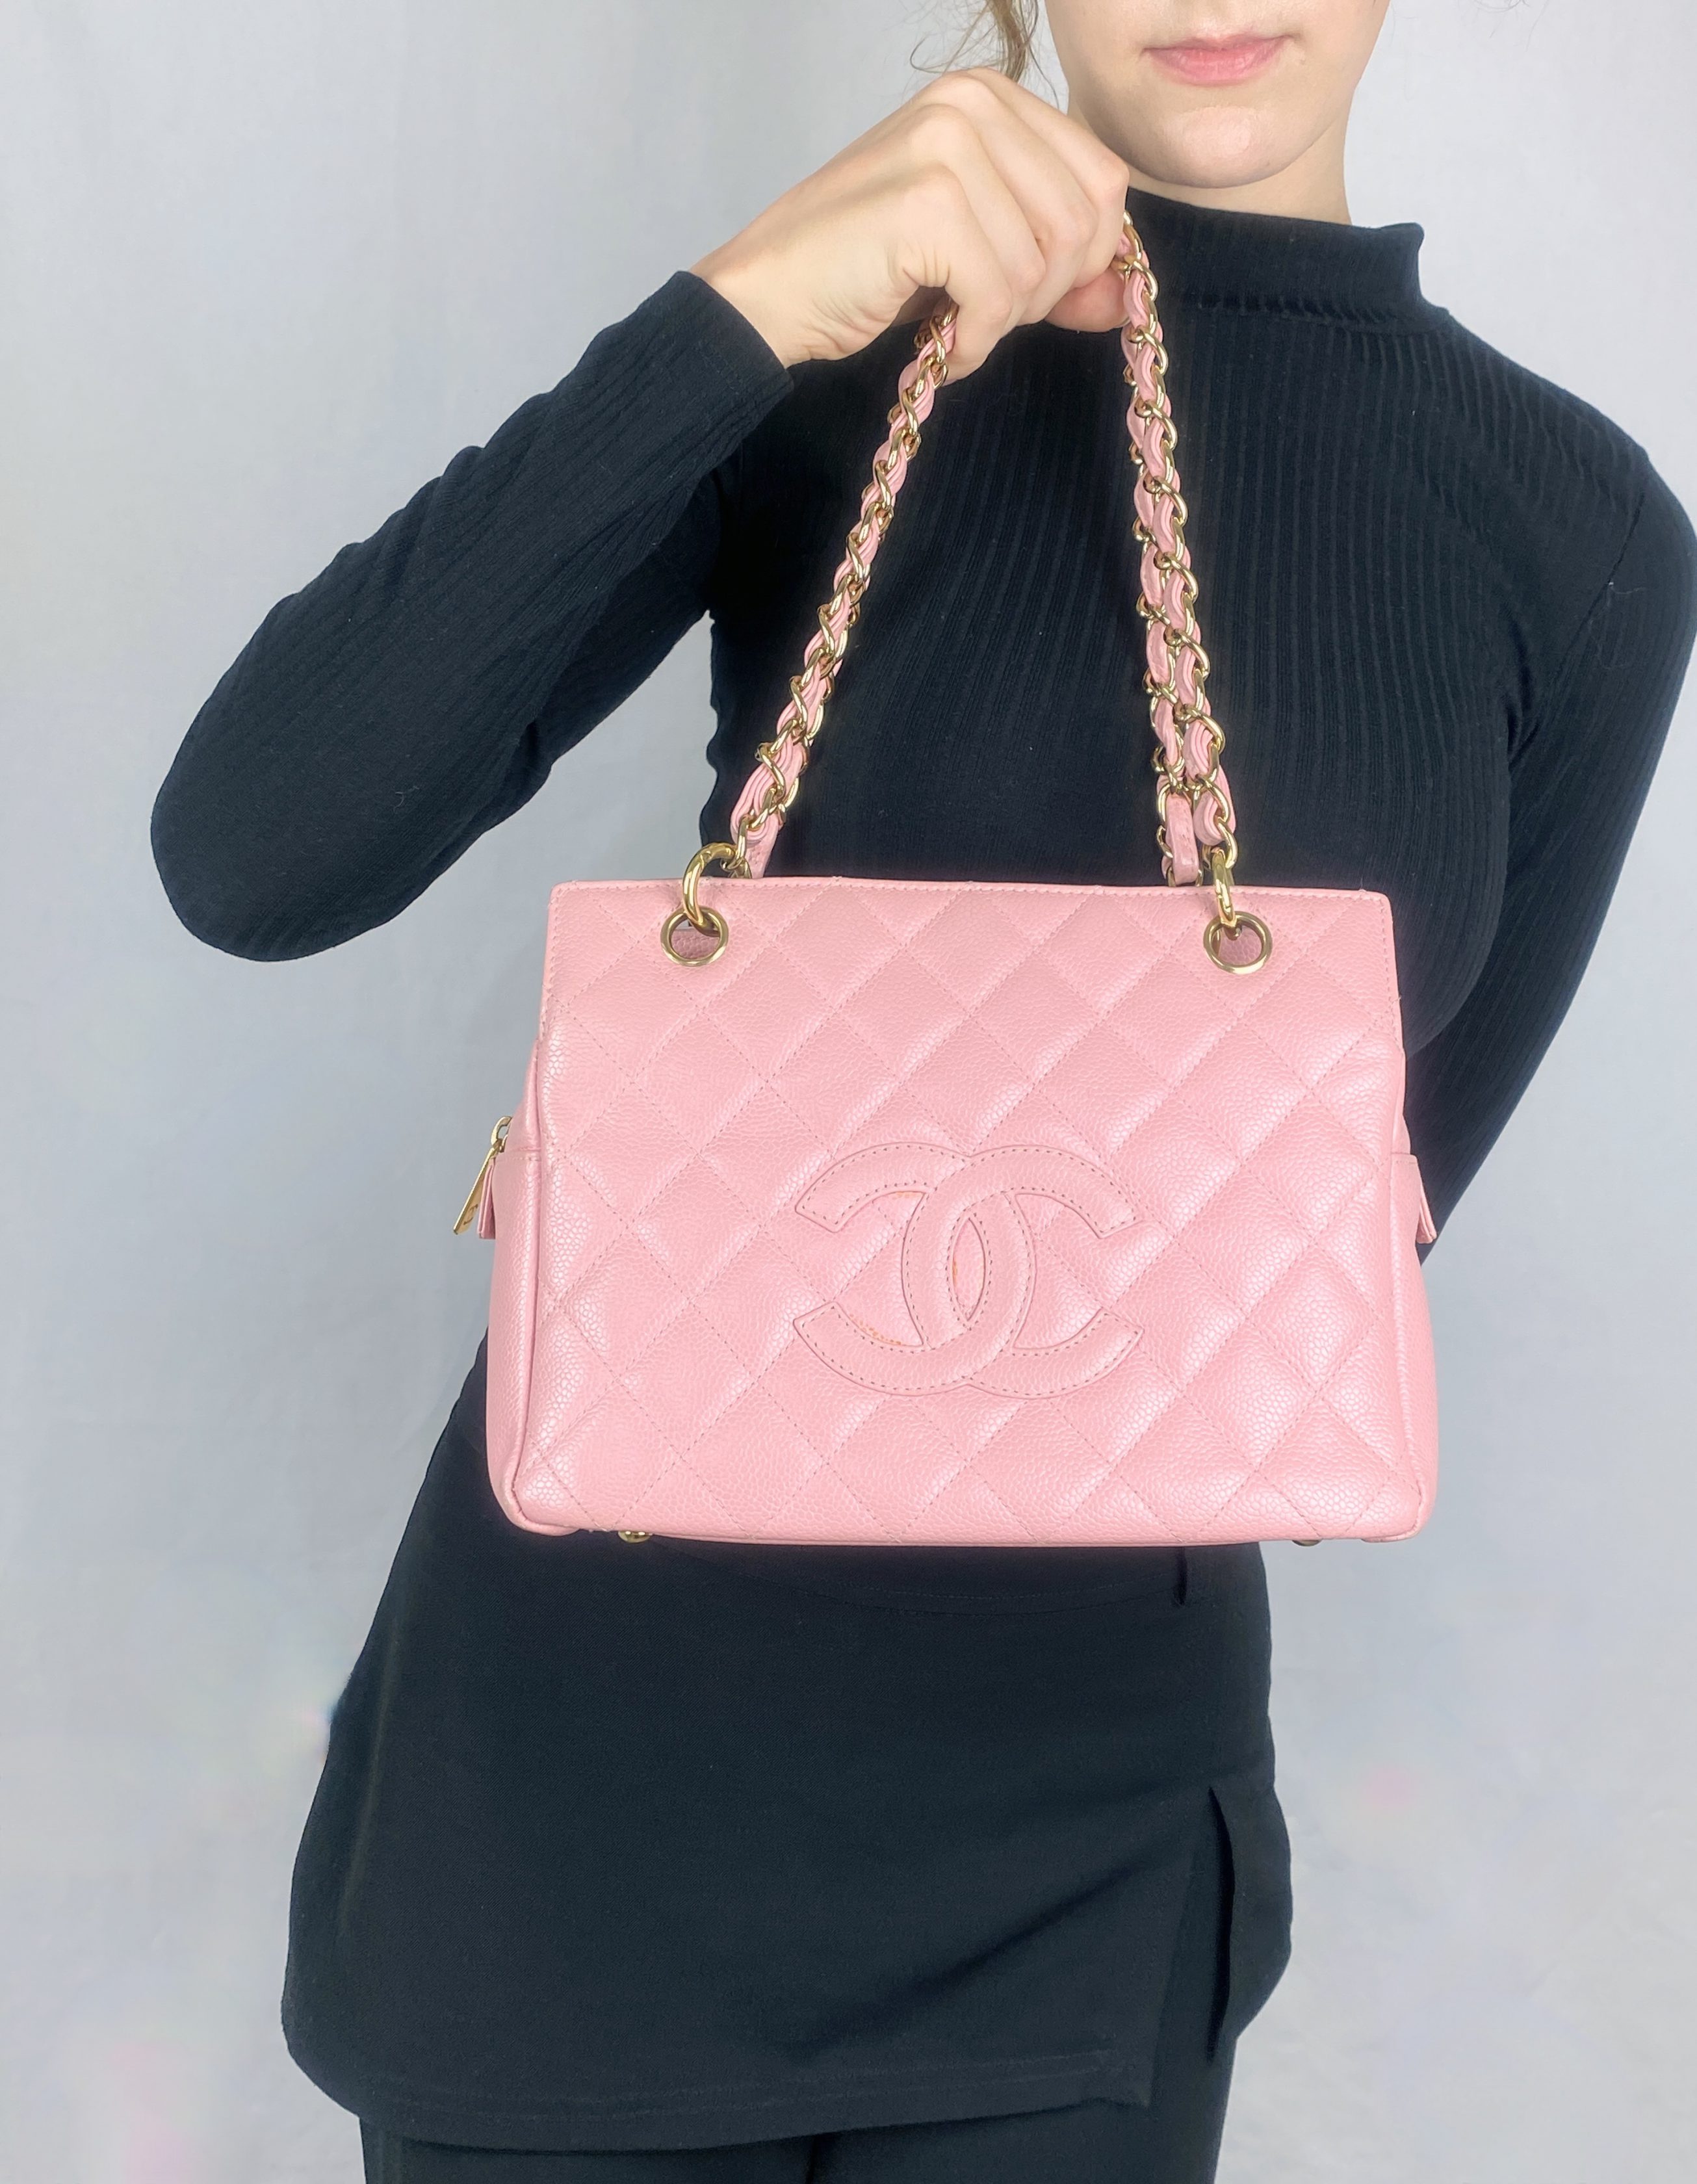 Chanel Discontinued Petite Timeless Tote (PTT) in Caviar Pink